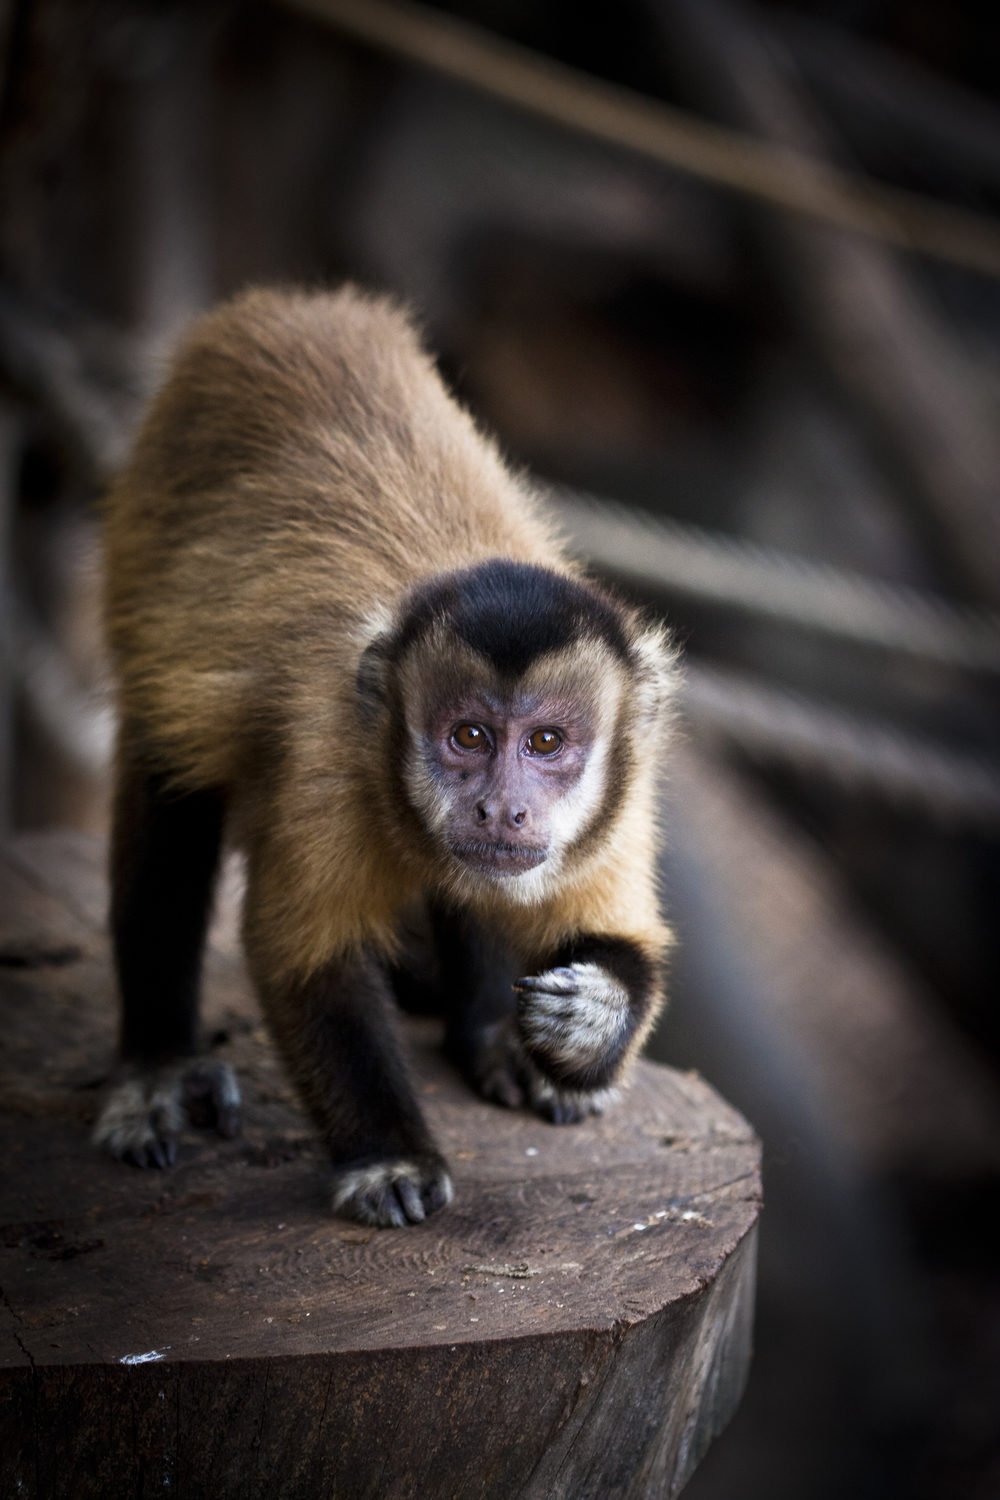 Quincy, an adult female capuchin monkey (Sapajus spp.). Quincy is one of the 24 capuchins hosted in four groups at the Unit of Cognitive Primatology of the Istituto di Scienze e Tecnologie della Cognizione, CNR, in Rome, Italy, where the project “Emotional basis of primate reciprocity” is being carried out. Photo credit:  Sabrina Rossi